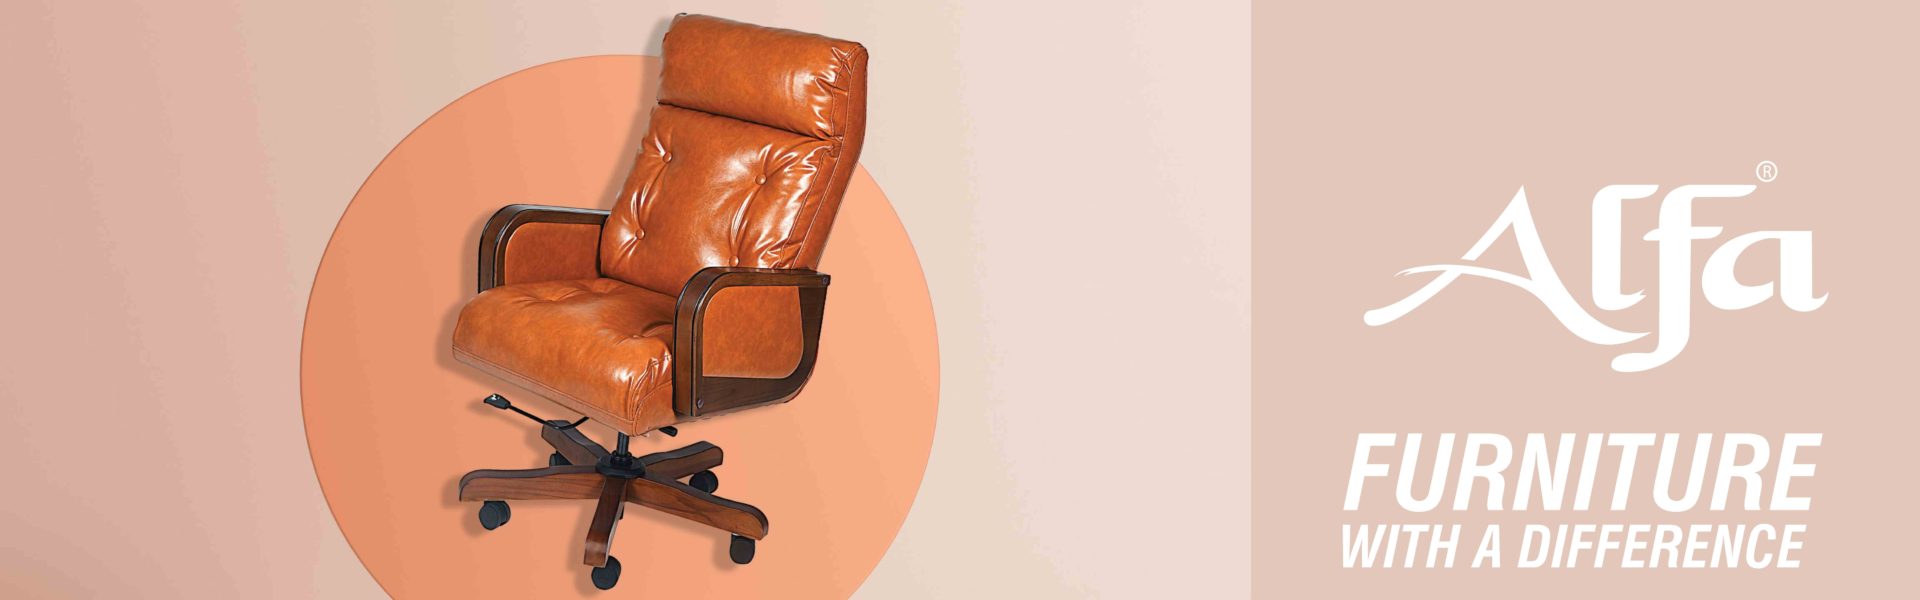 Office chair Manufacturer and supplier in Chandigarh